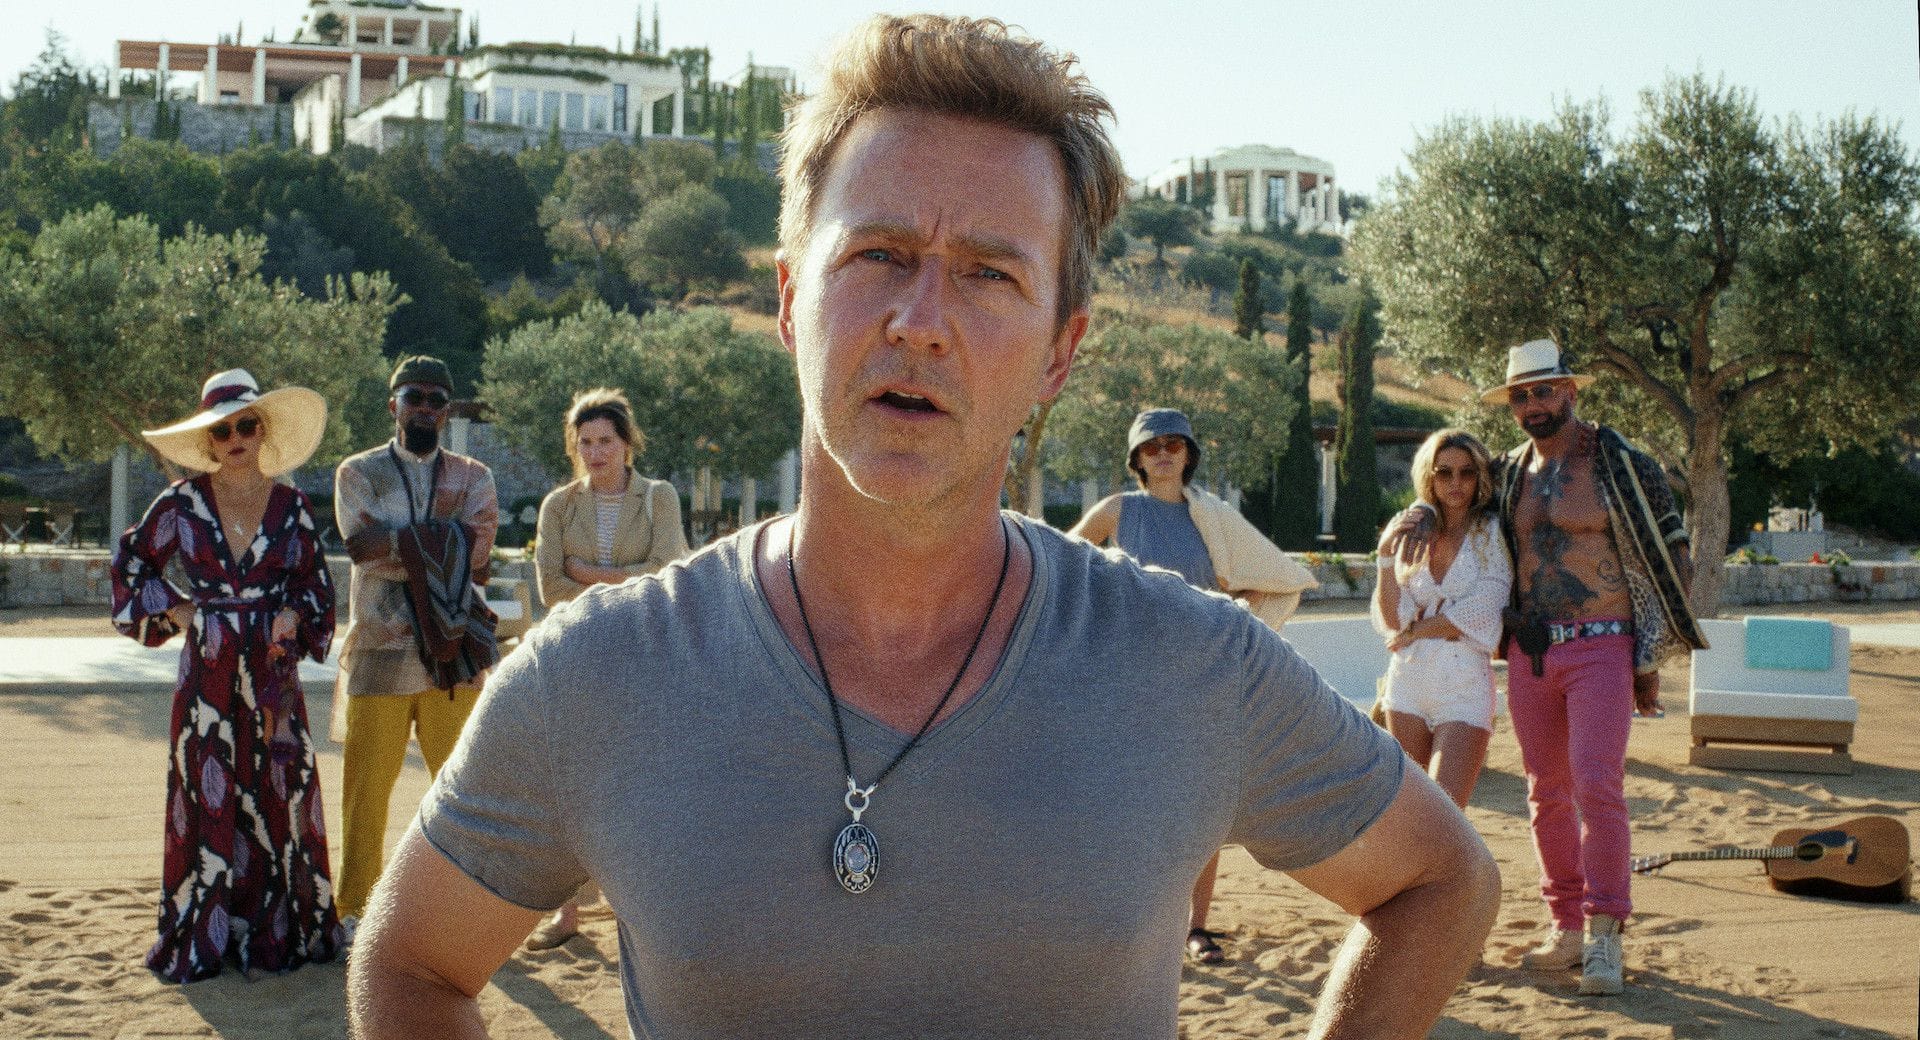 Edward Norton in the foreground, looking puzzled in a grey t-shirt on a Greek island beach, with an extravagantly dressed cast lined up behind him including Kate Hudson, Leslie Odom Jr, Kathryn Hahn, and Dave Bautista